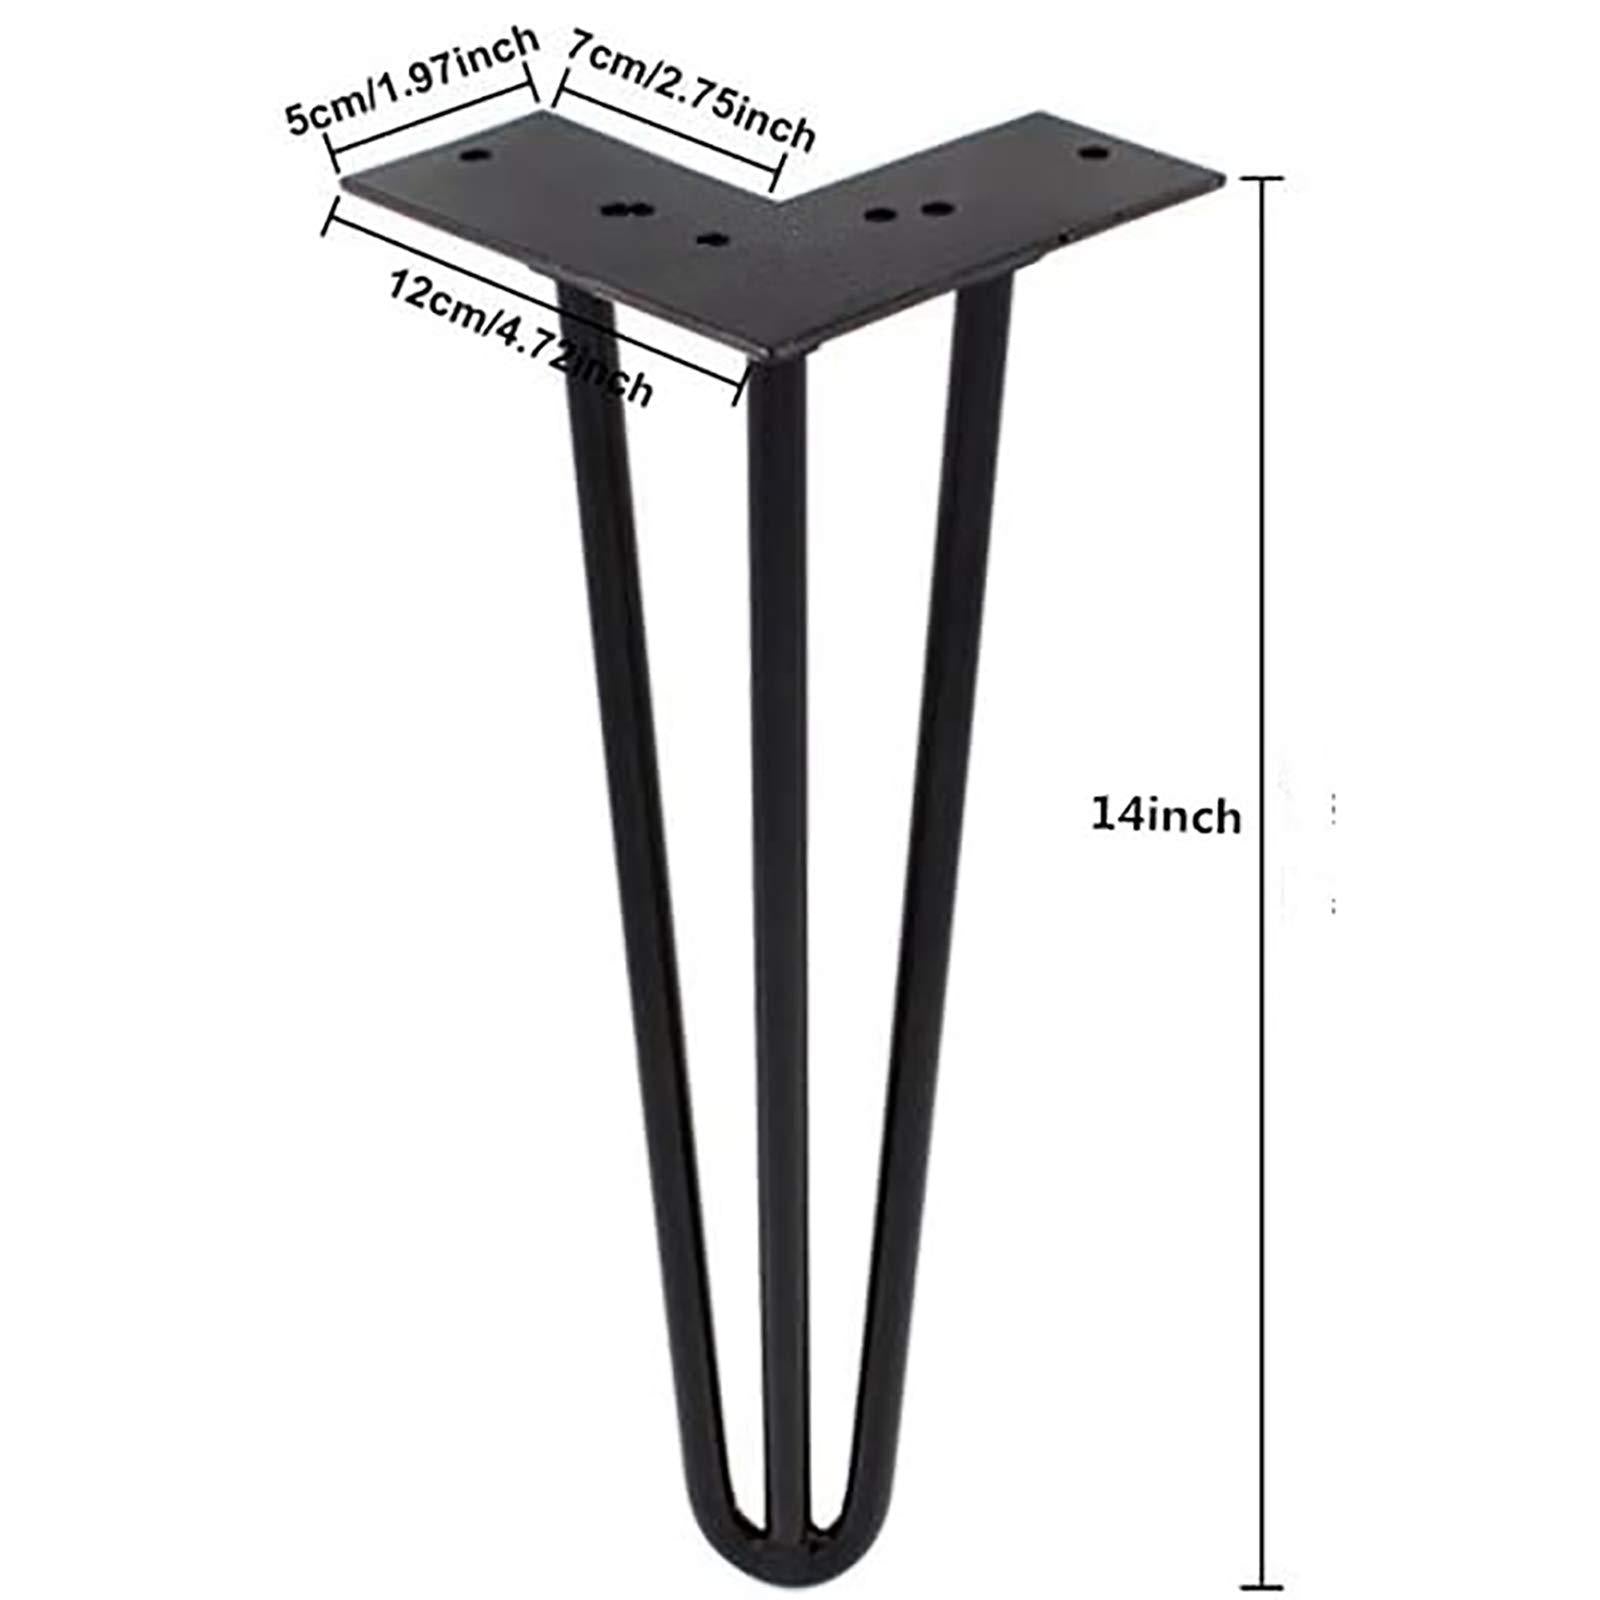 Size of the table legs